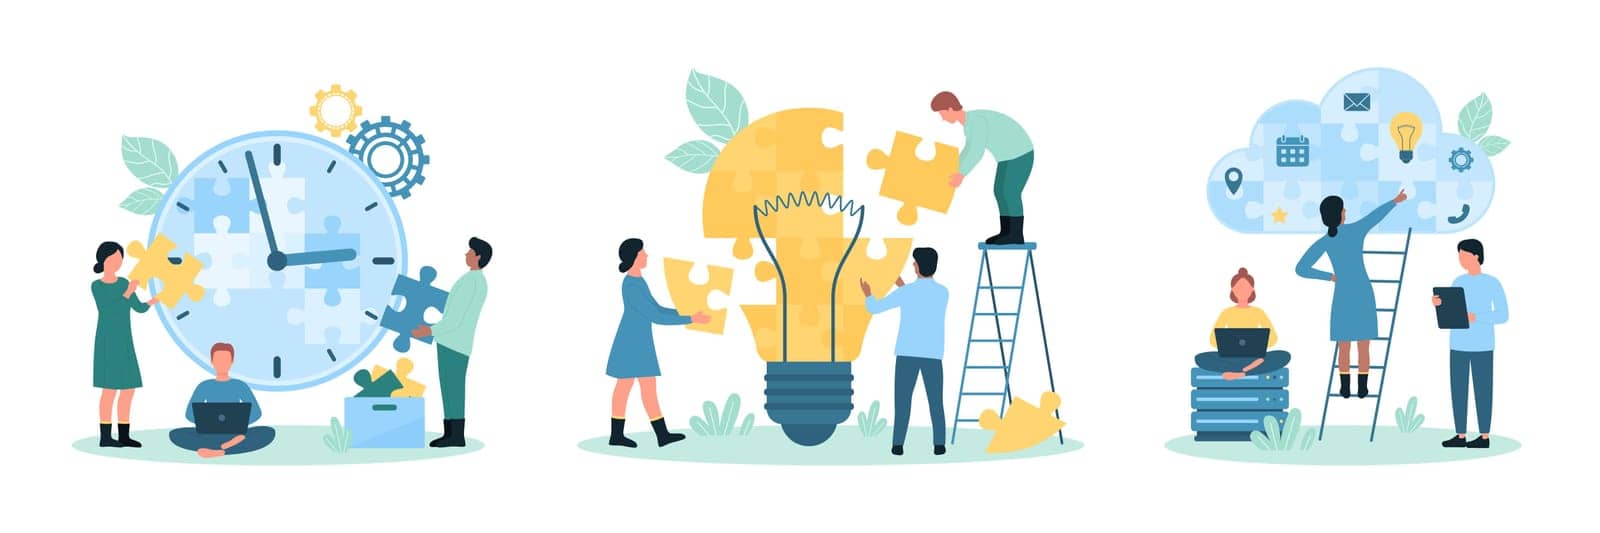 Business development strategy set vector illustration. Cartoon tiny people build light bulb and clock with puzzle pieces, inventors develop digital project with cloud service, database and software